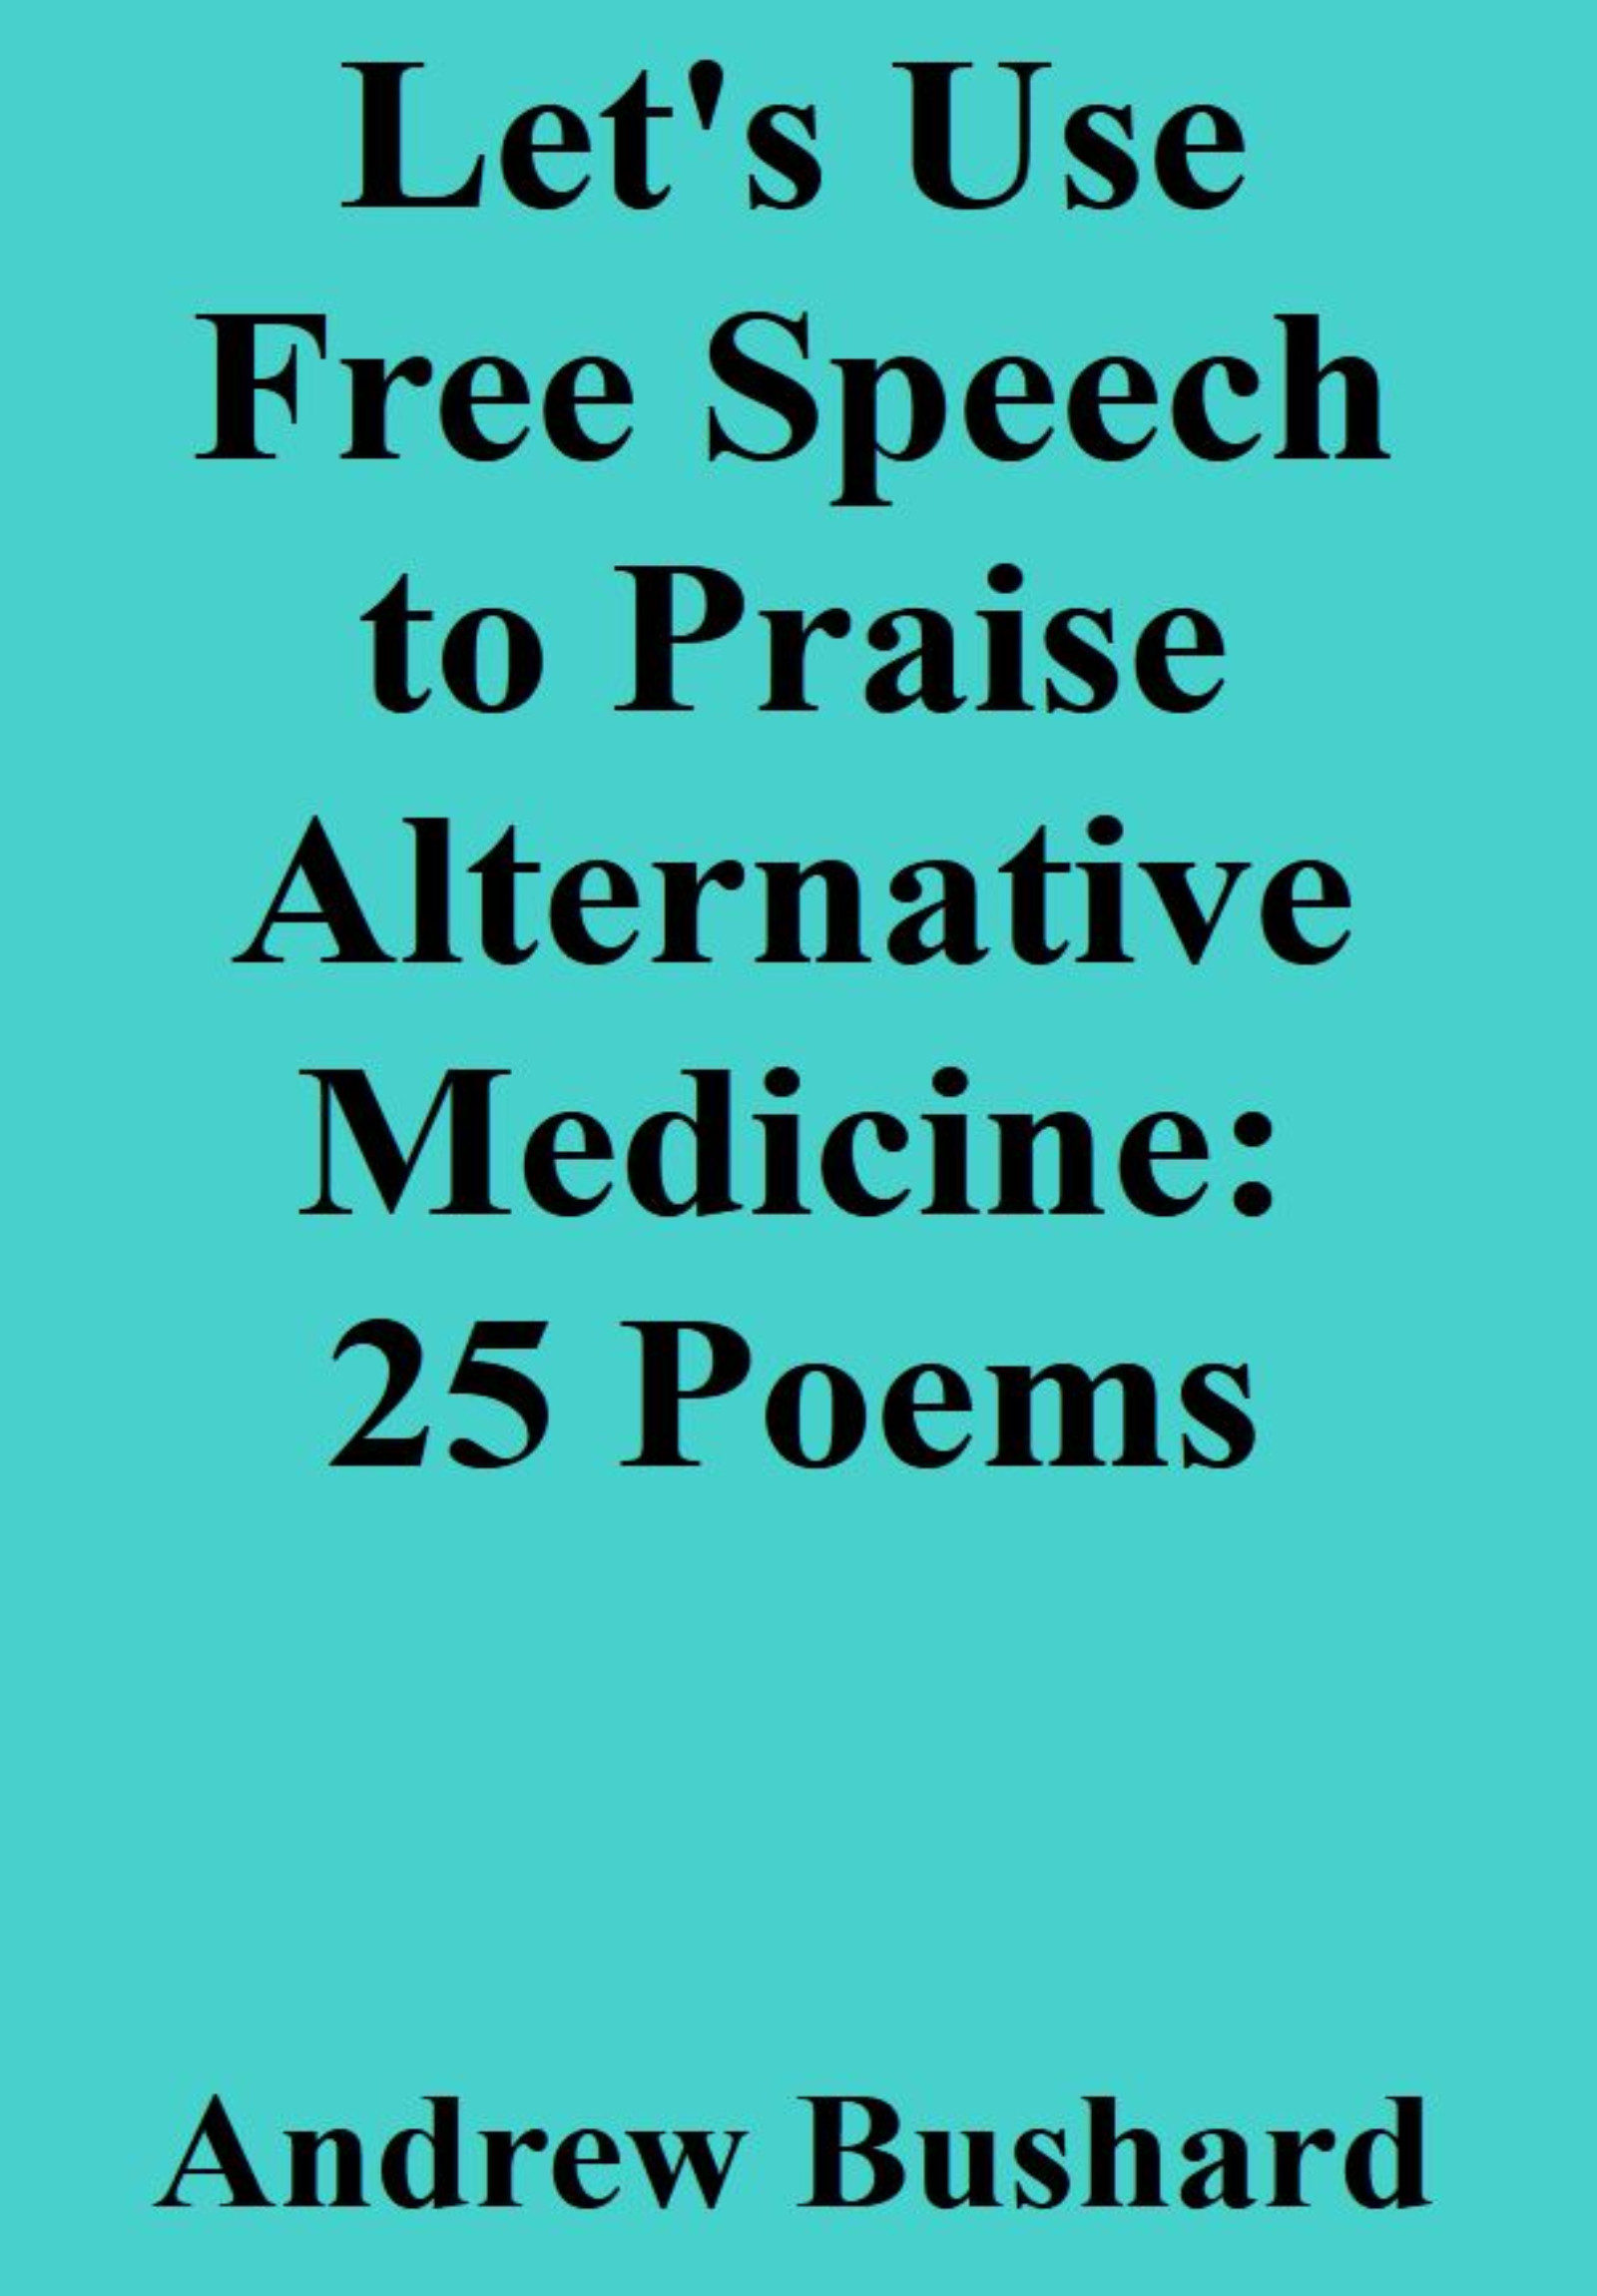 Let's Use Free Speech to Praise Alternative Medicine: 25 Poems's featured image